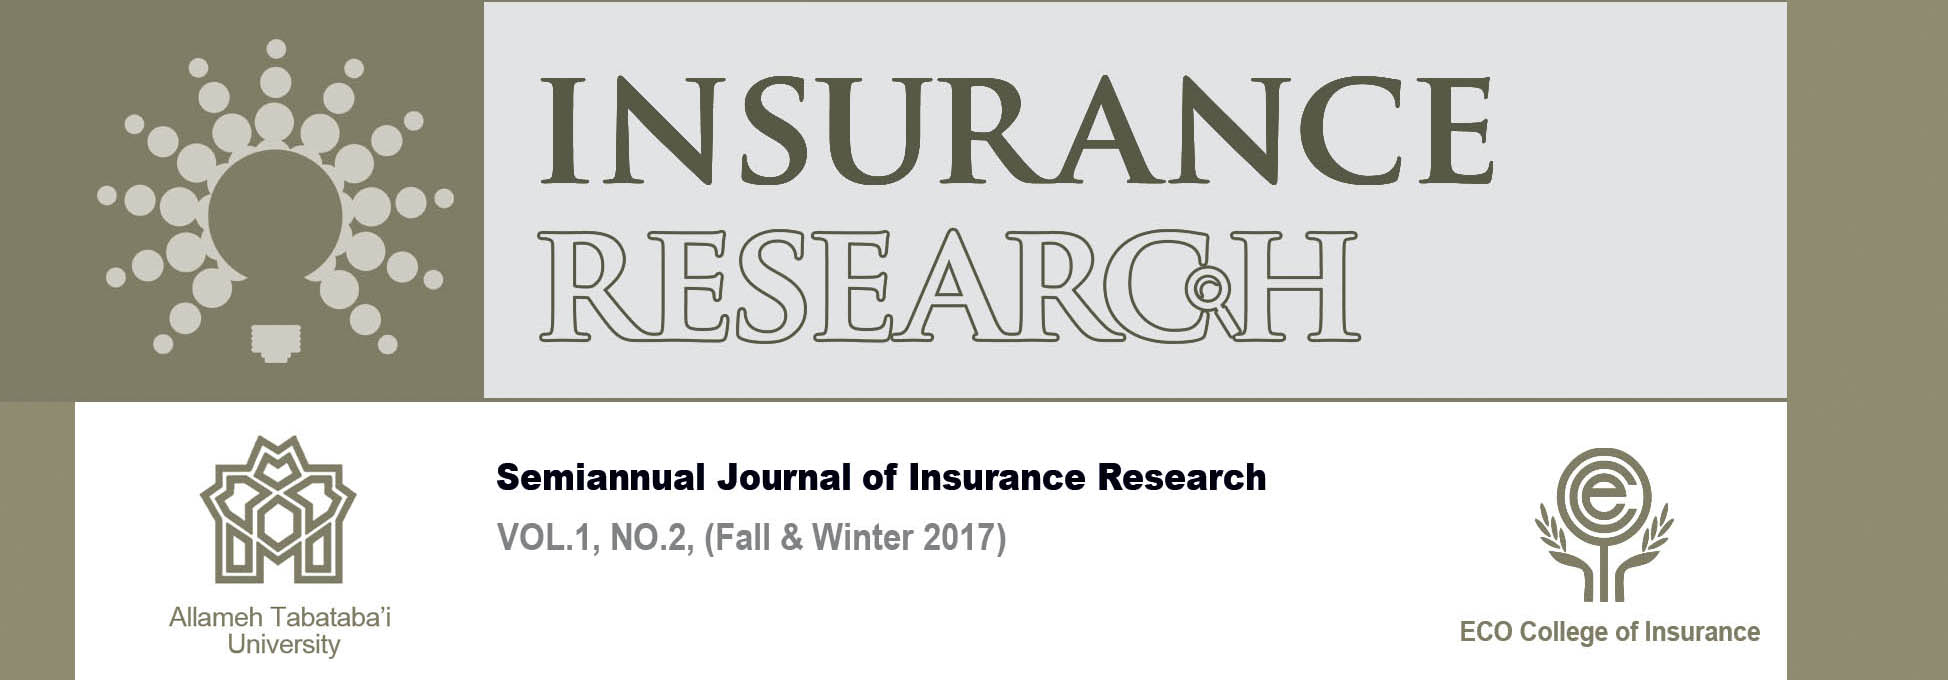 Journal of Insurance Research